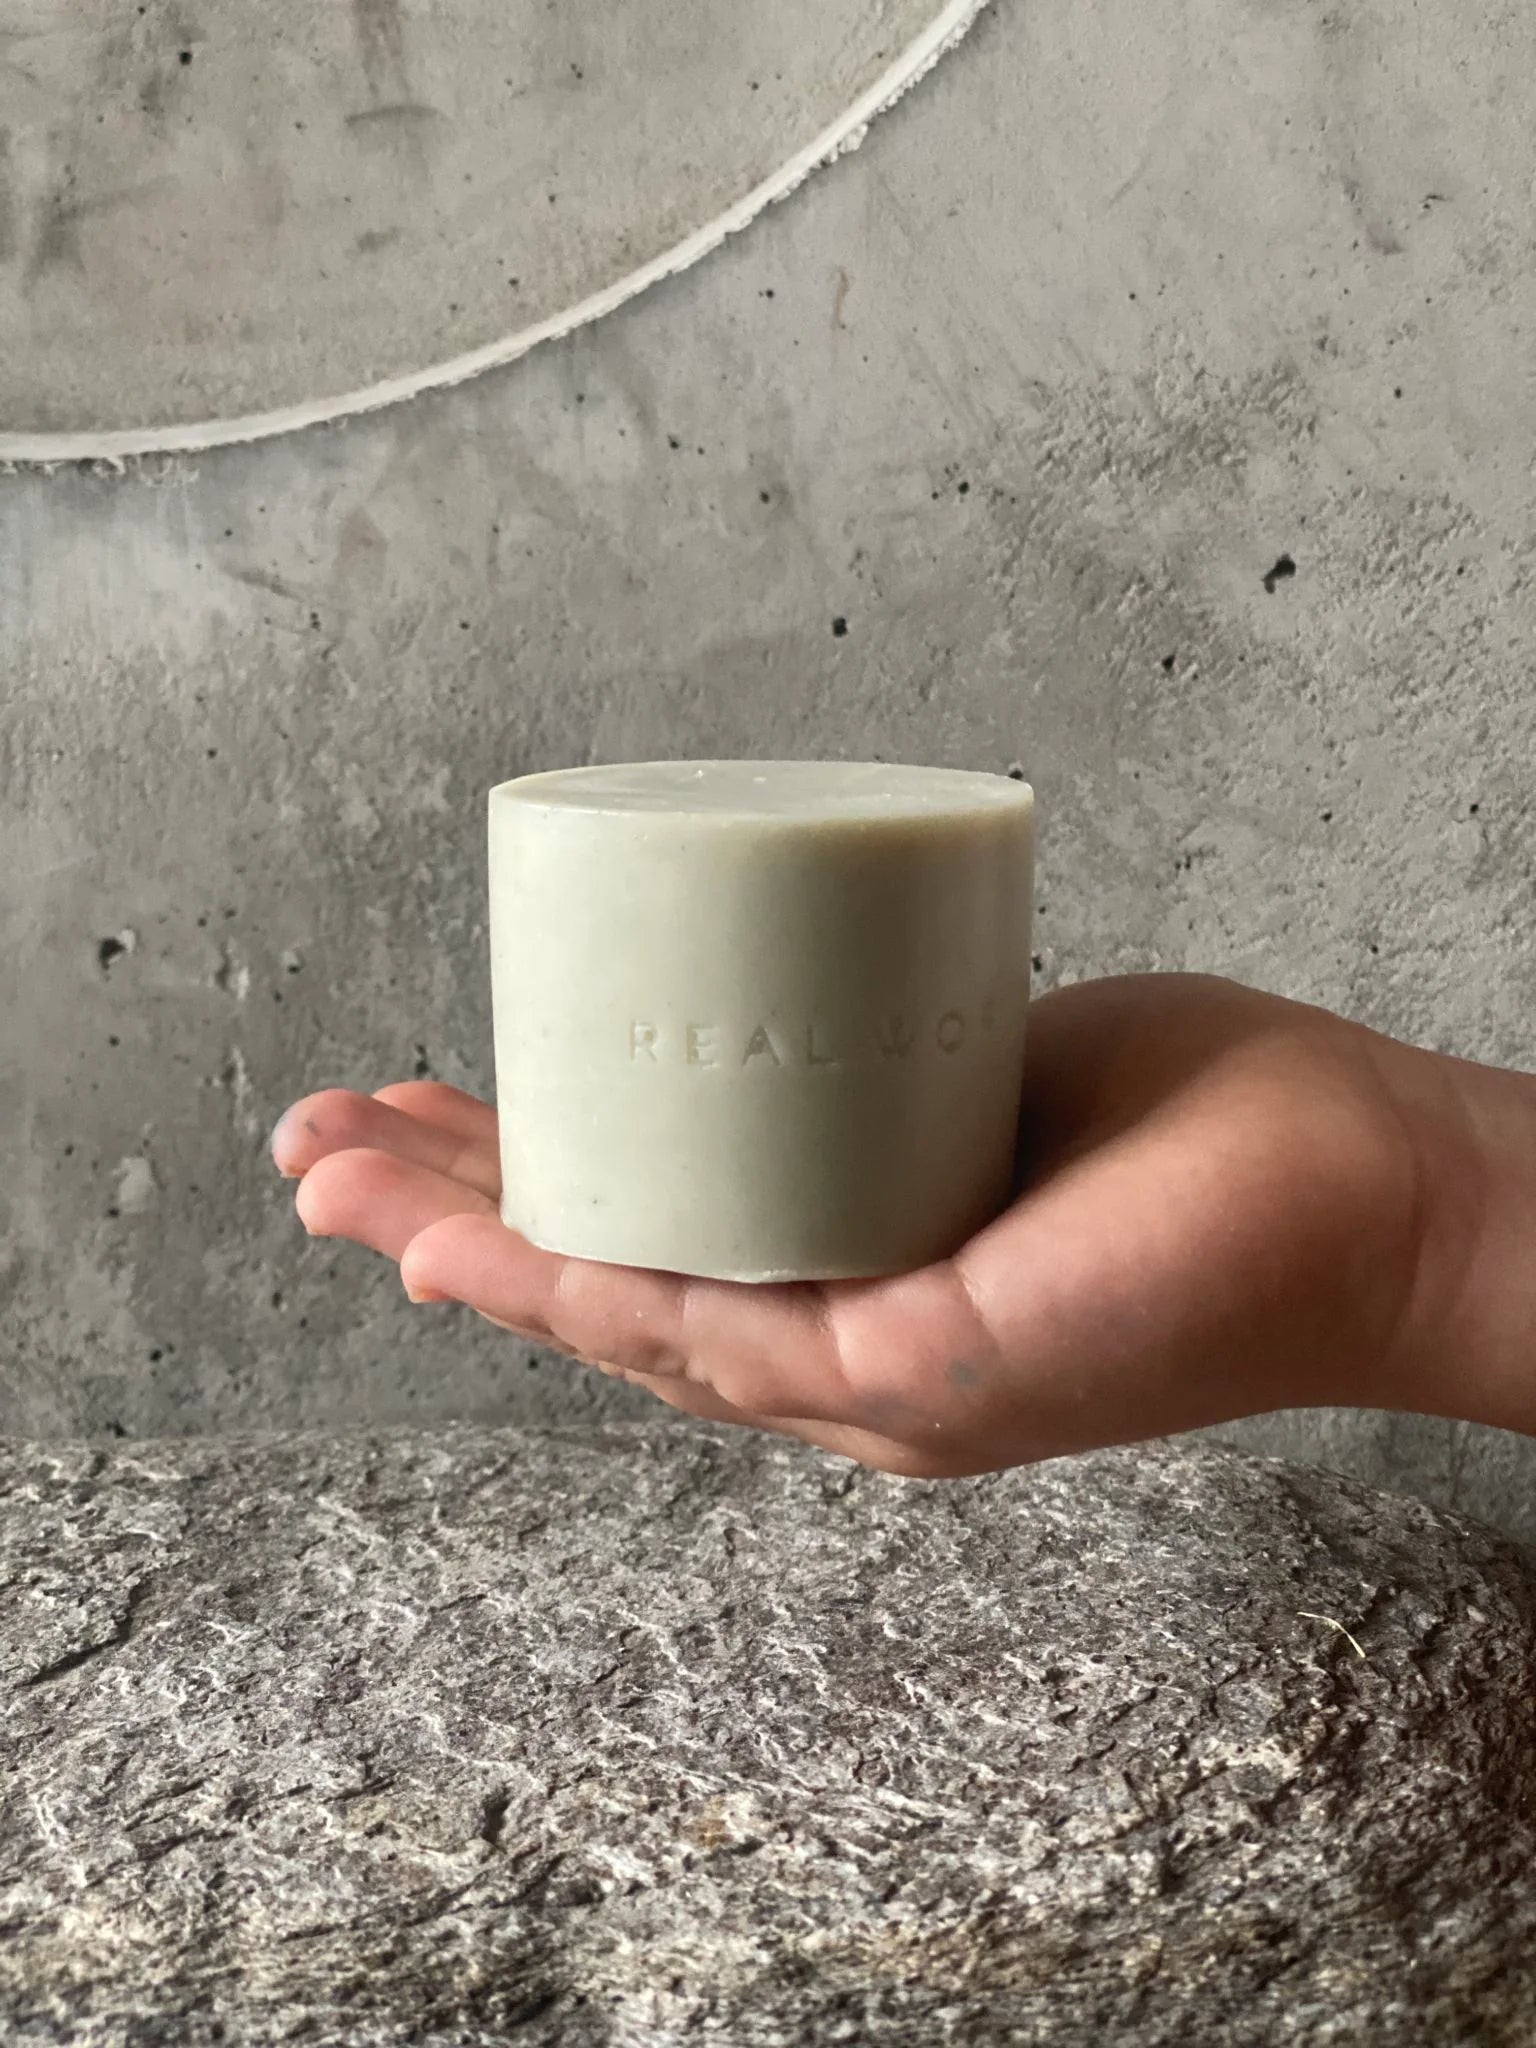 A gently held Soap Bar - Kawakawa, Clay & Palmarosa by Real World with the inscription "real love" against a concrete backdrop, symbolizing simplicity, serenity, and restorative cleansing.